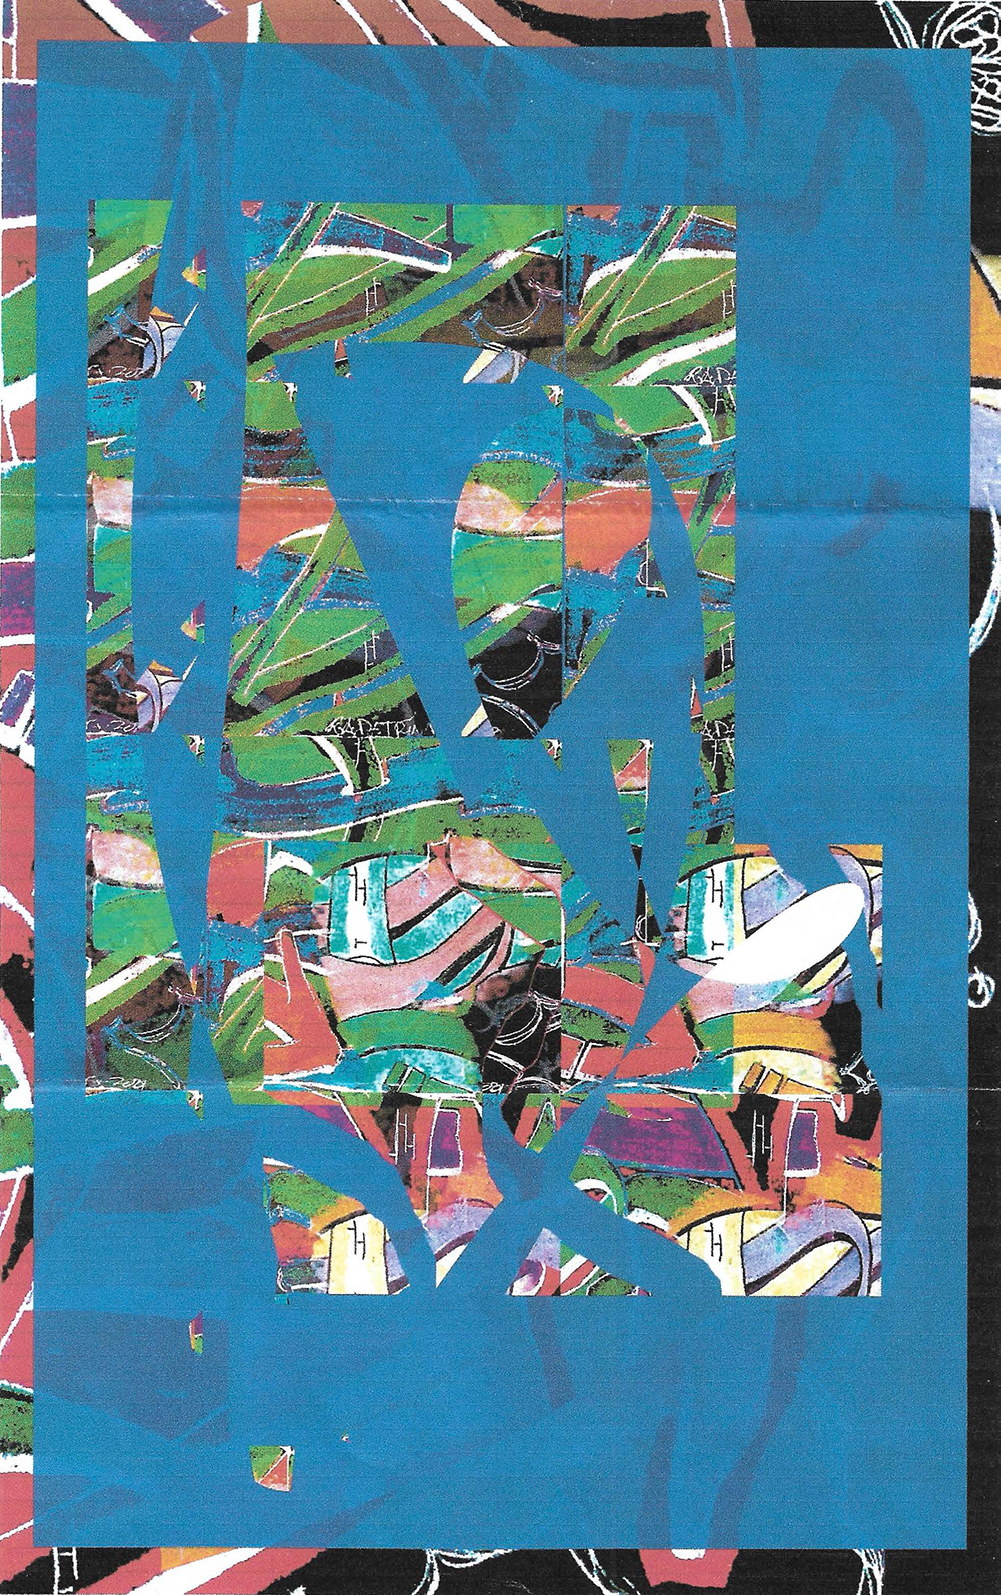 An abstract painting layered atop graffiti art on paper. The piece features a semi-transparent teal rectangle overlaid atop green, black, white, and pink graffiti art which has been cut, collaged and painted. Abstract shapes of collage graffiti art appear inside the teal rectangle. The image features two horizontal folds suggesting the image had been folded in thirds. 